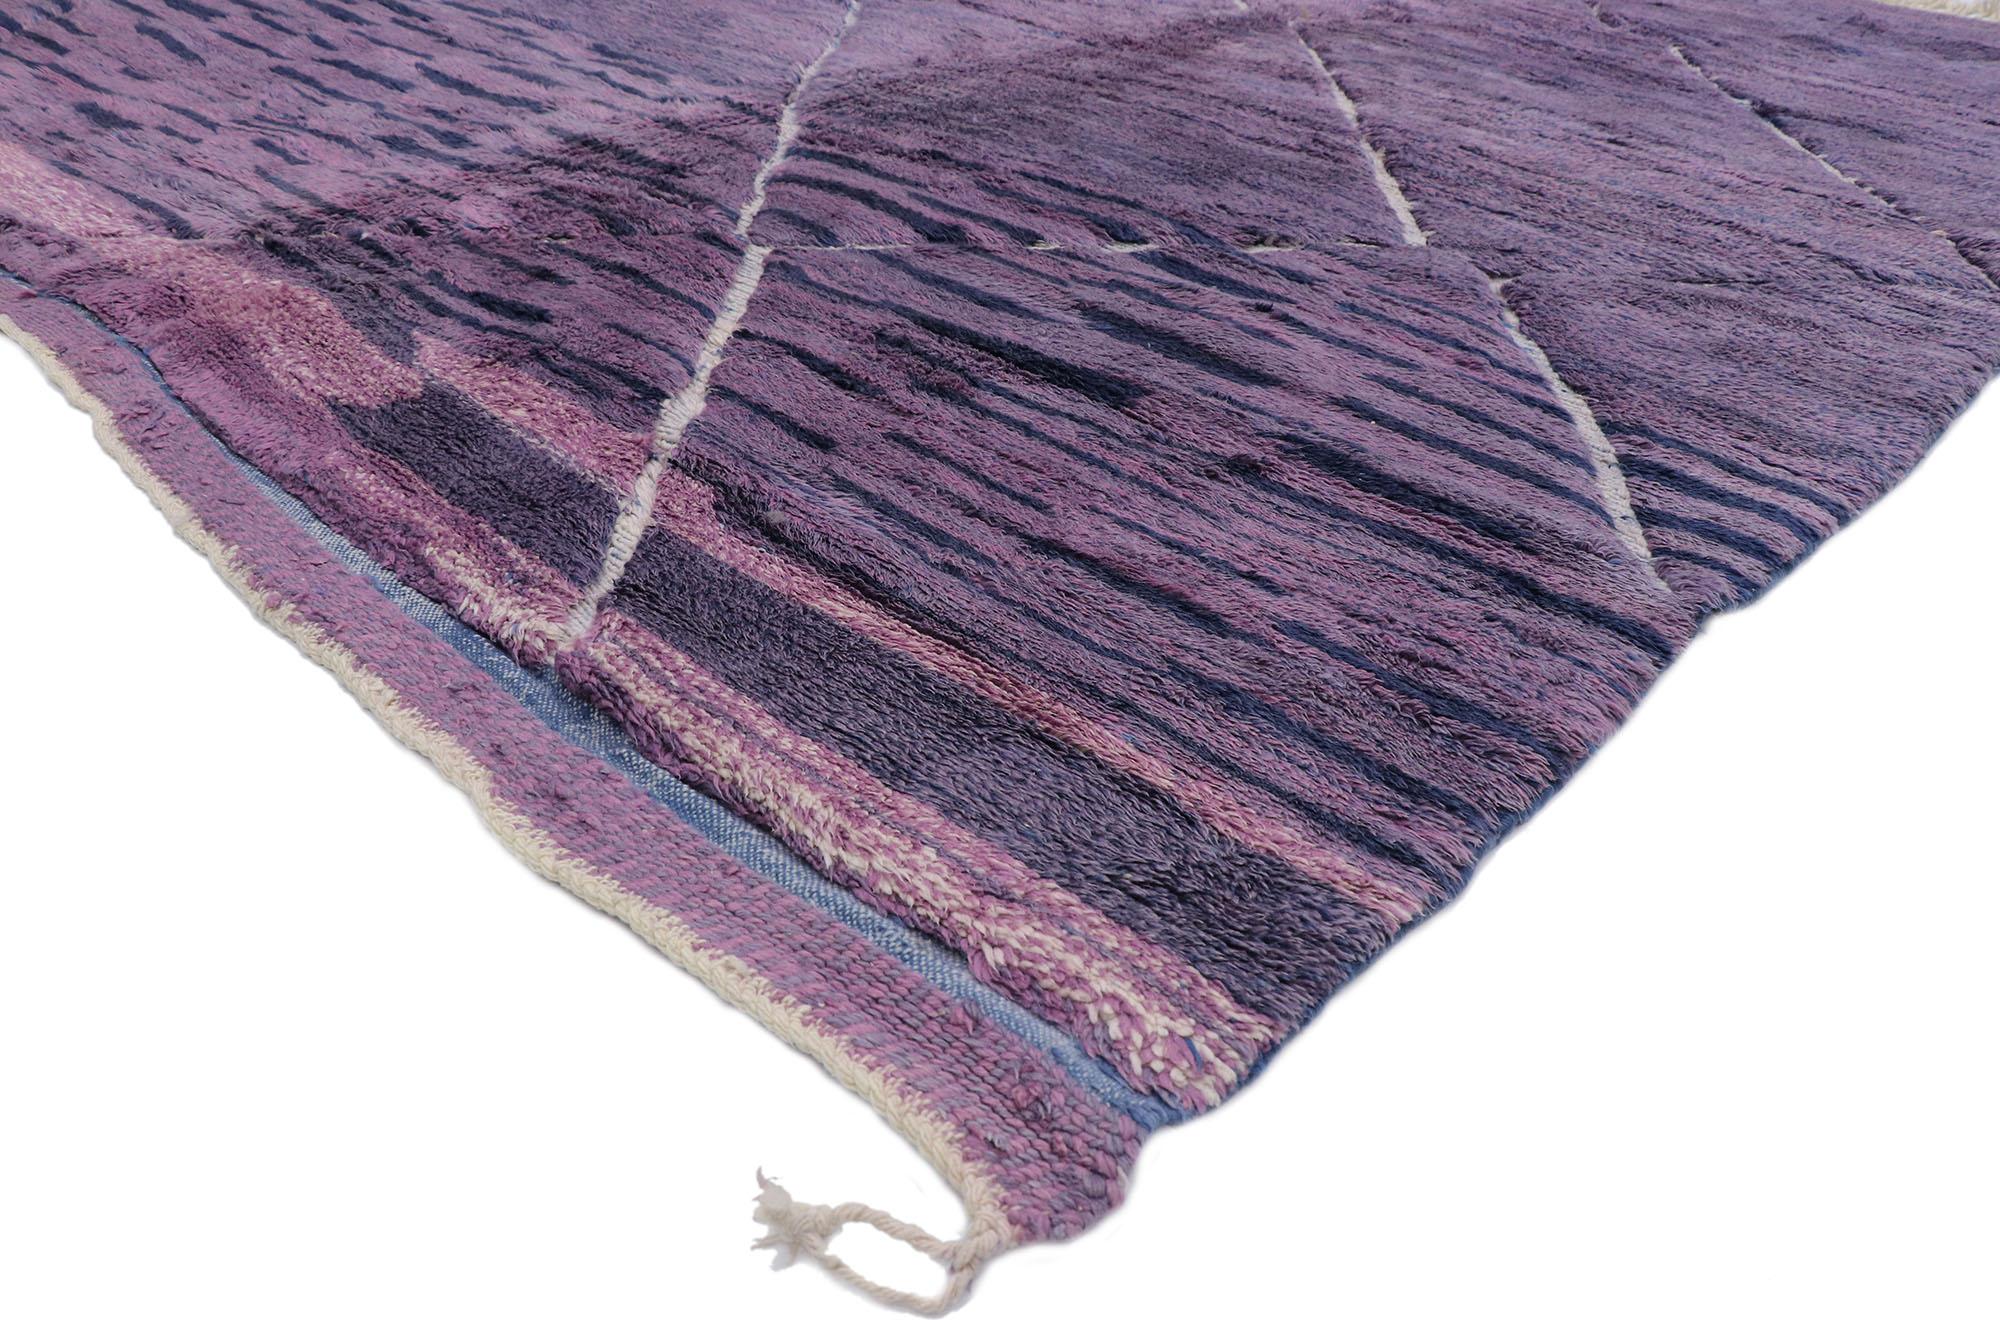 21138 Large Purple Abstract Moroccan Rug, 09'02 x 11'08.
Emulating boho chic style with a plush pile, this hand knotted wool purple abstract Moroccan rug is a captivating vision of woven beauty. The visual complexity and dreamy color palette palette